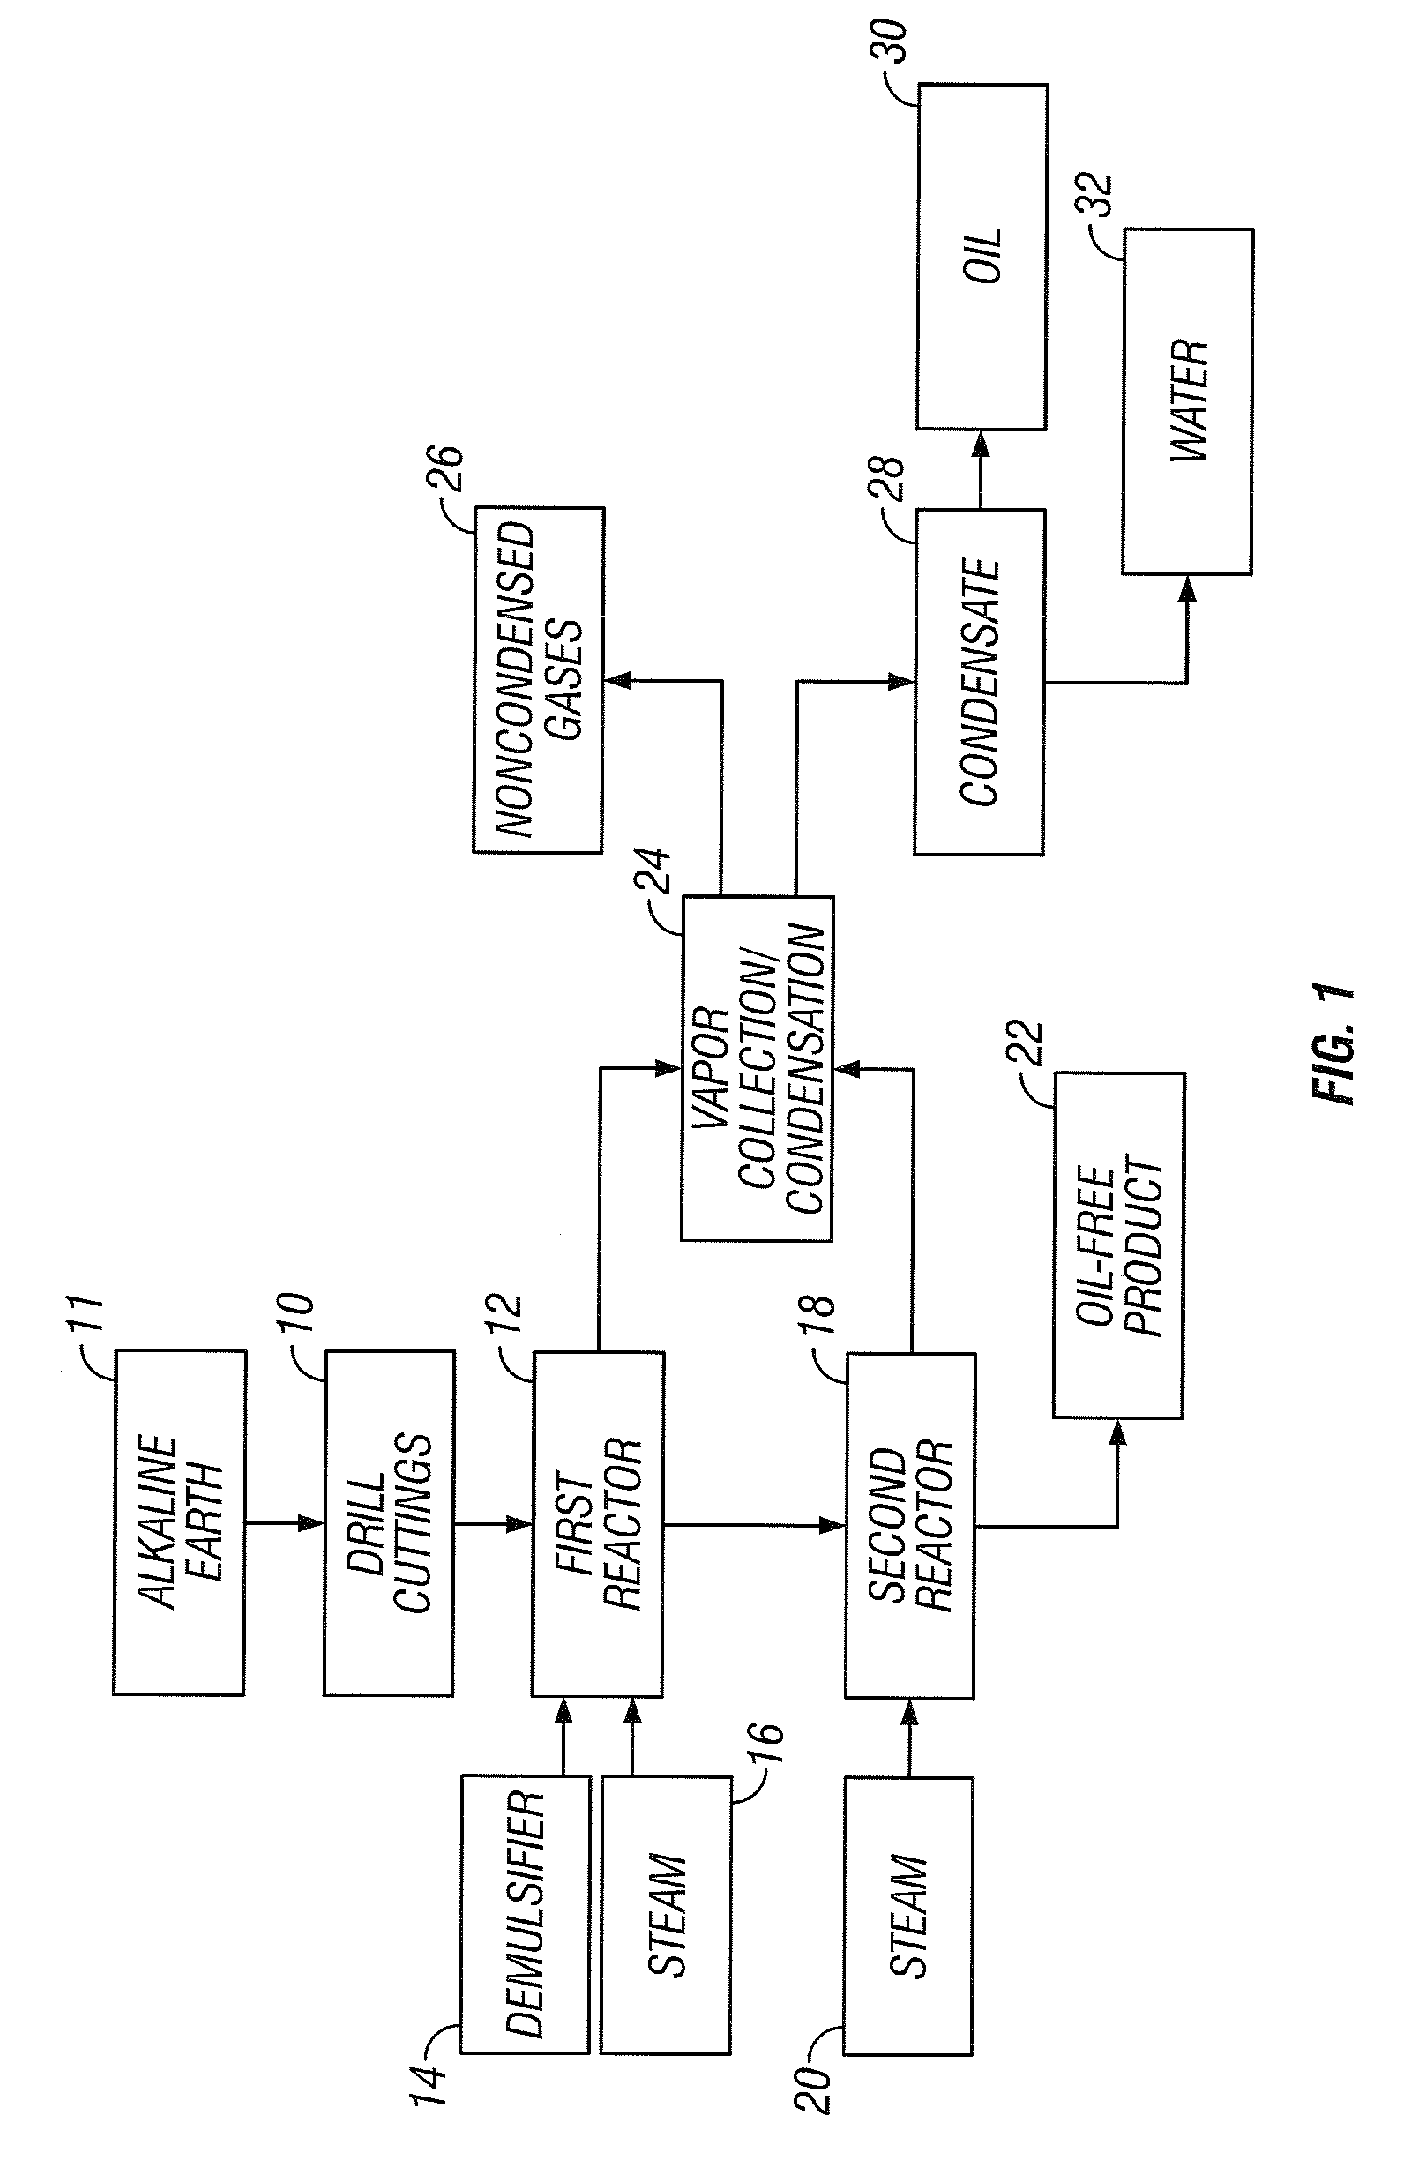 Oil contaminated substrate treatment method and apparatus